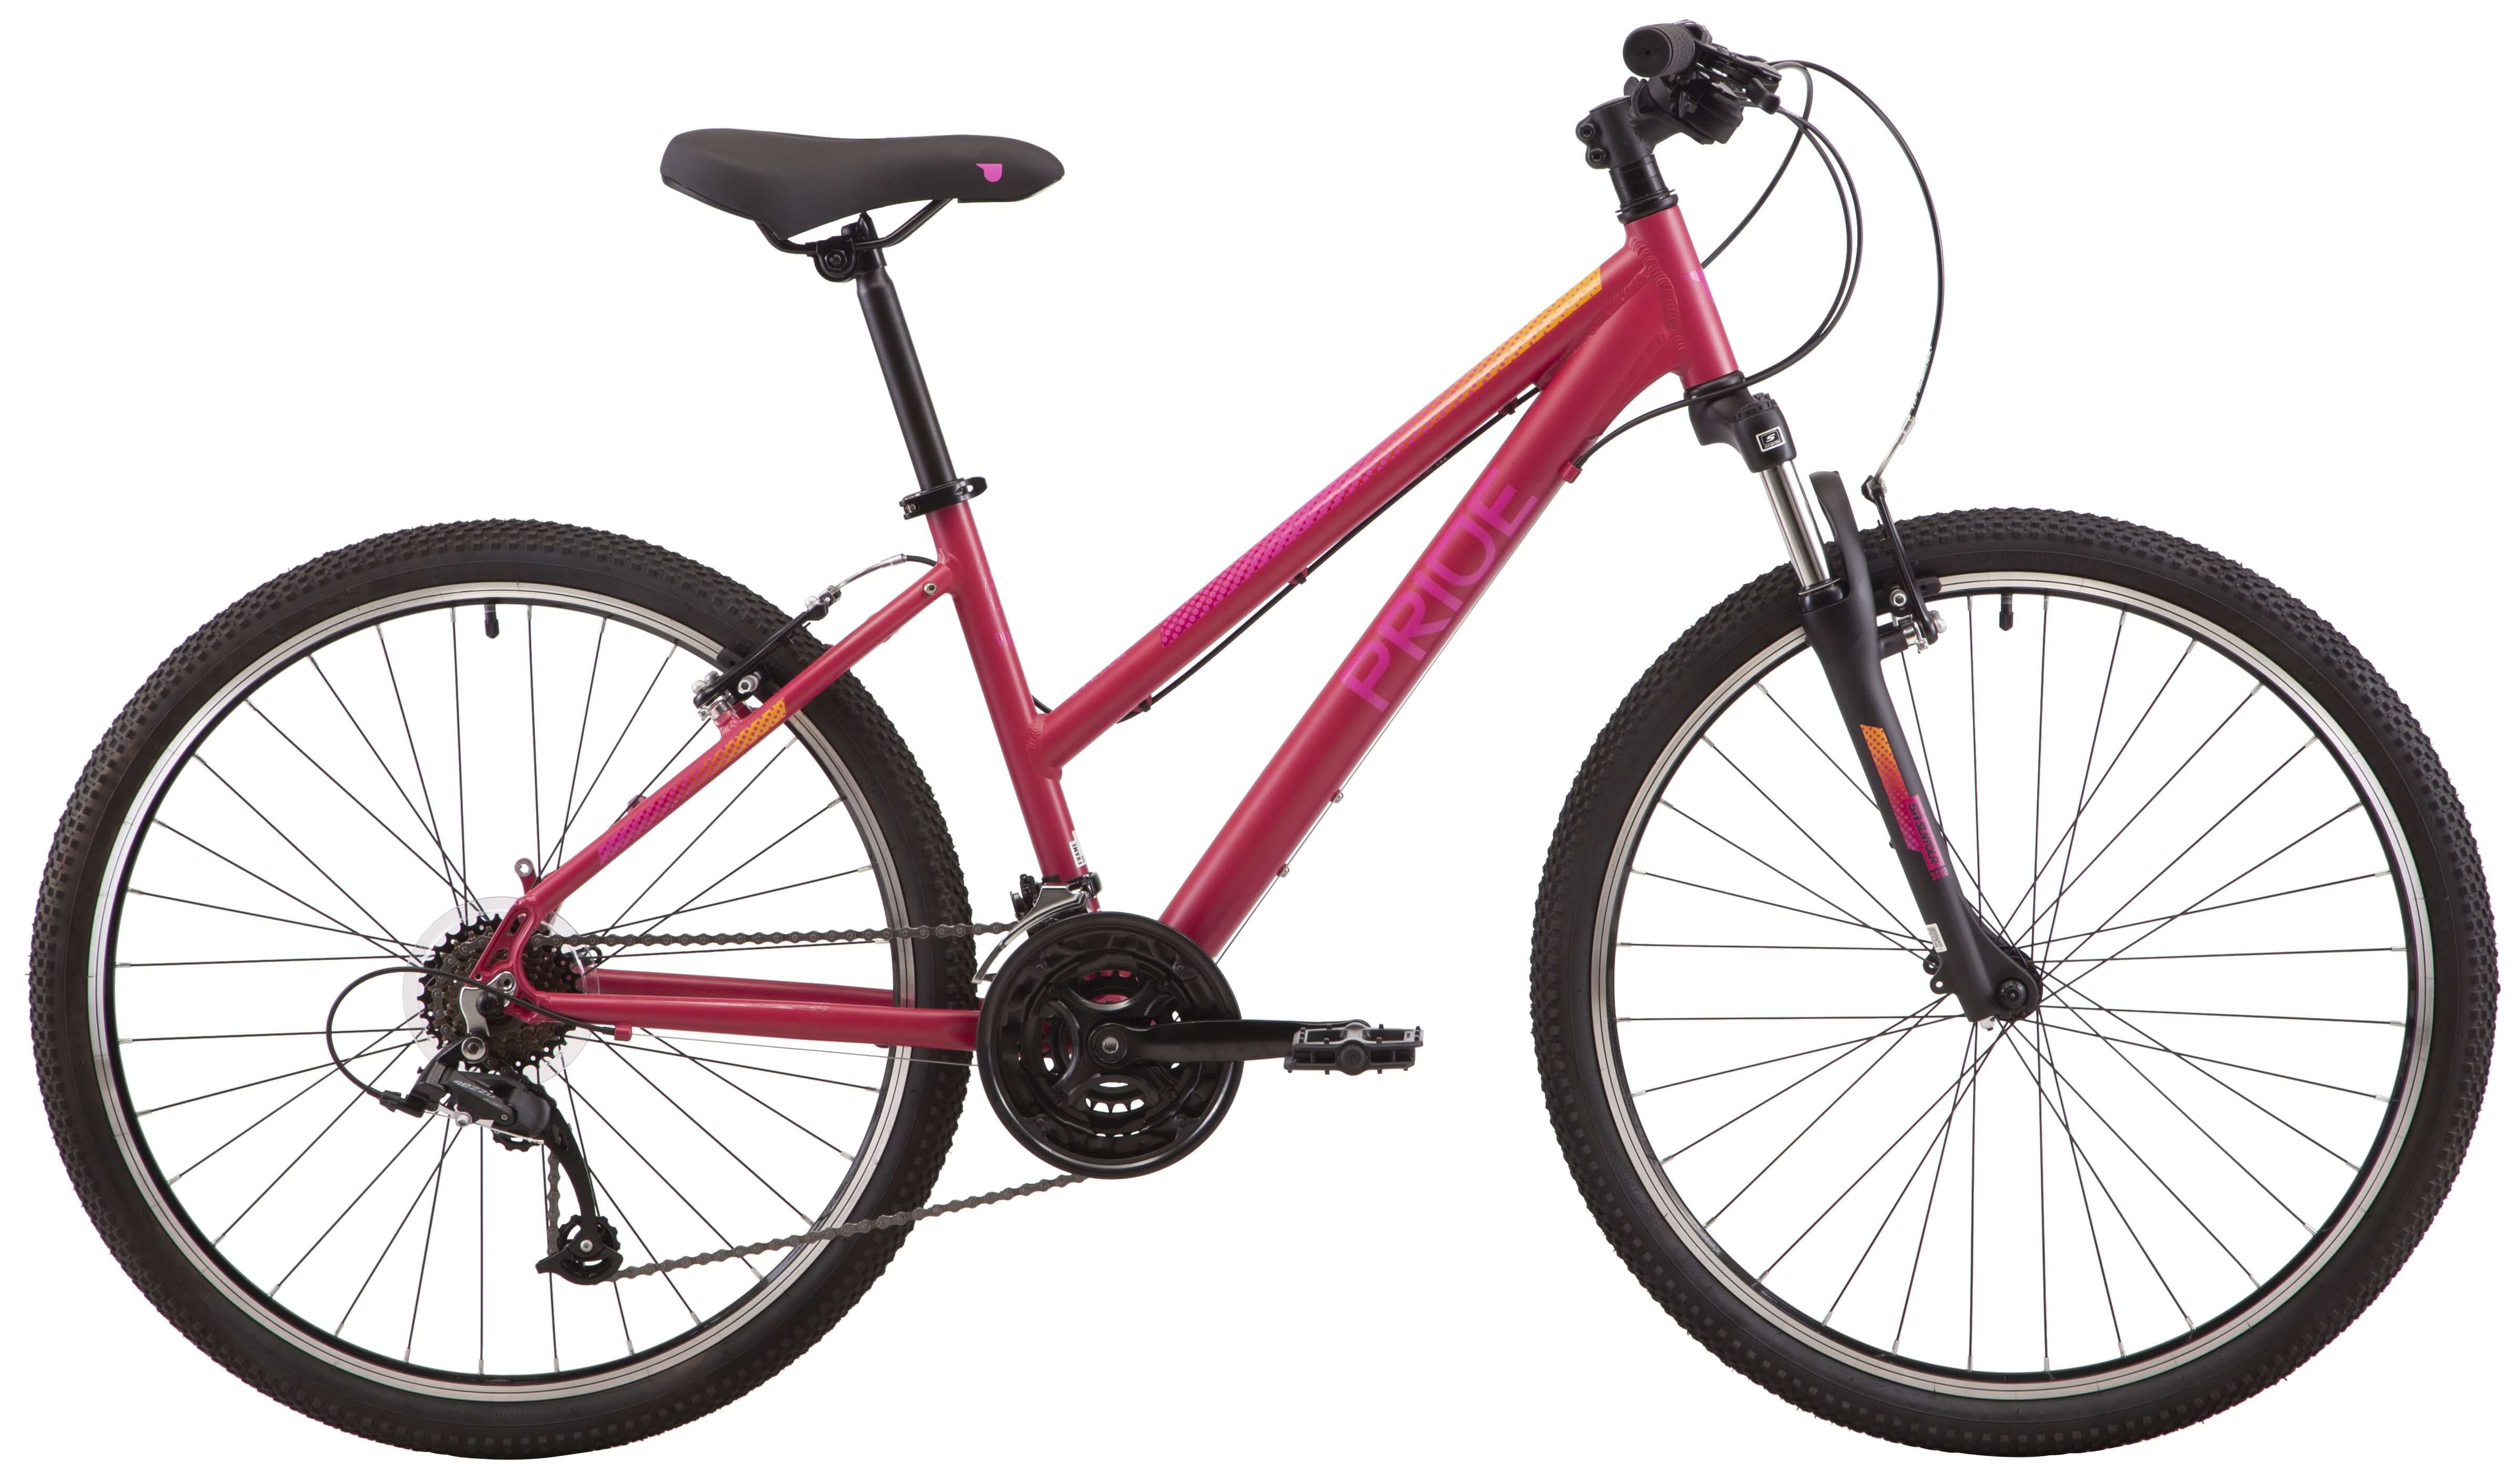 26" Pride Stella 6.1 frame - S 2022 burgundy (rear and front switches and tamnet - Microshift) Photo